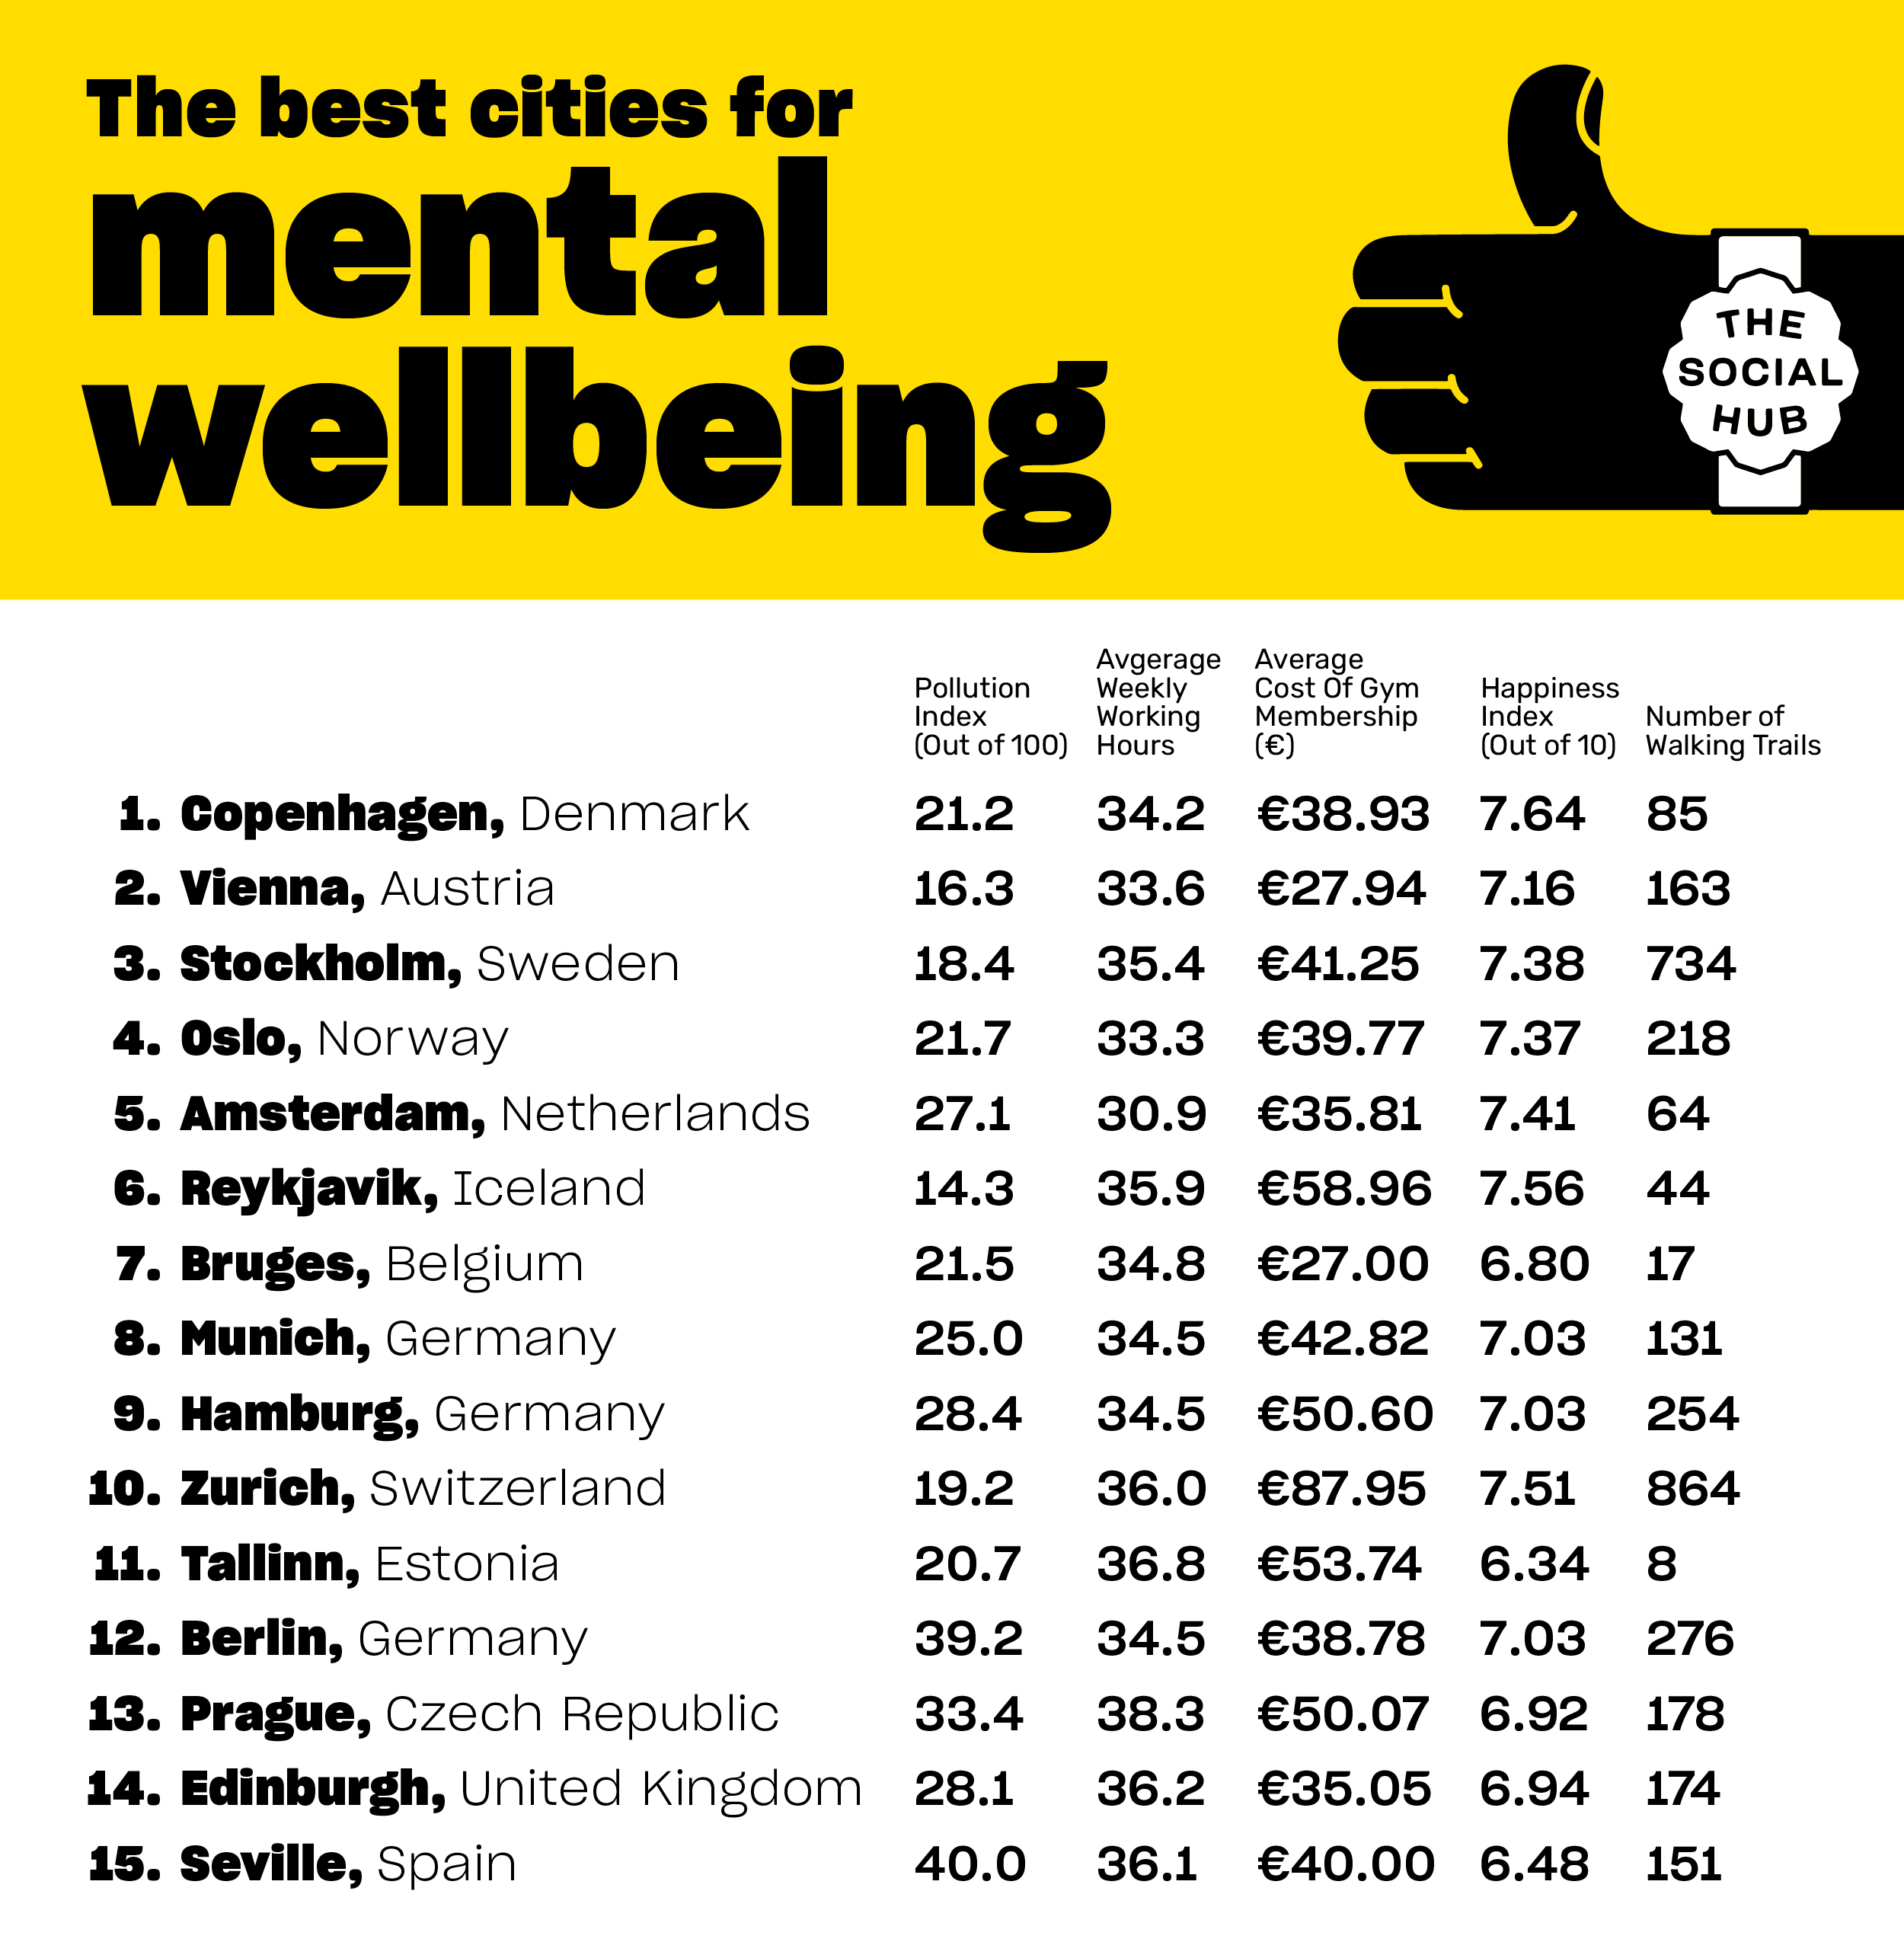 A list of top 15 cities for mental wellbeing in Europe